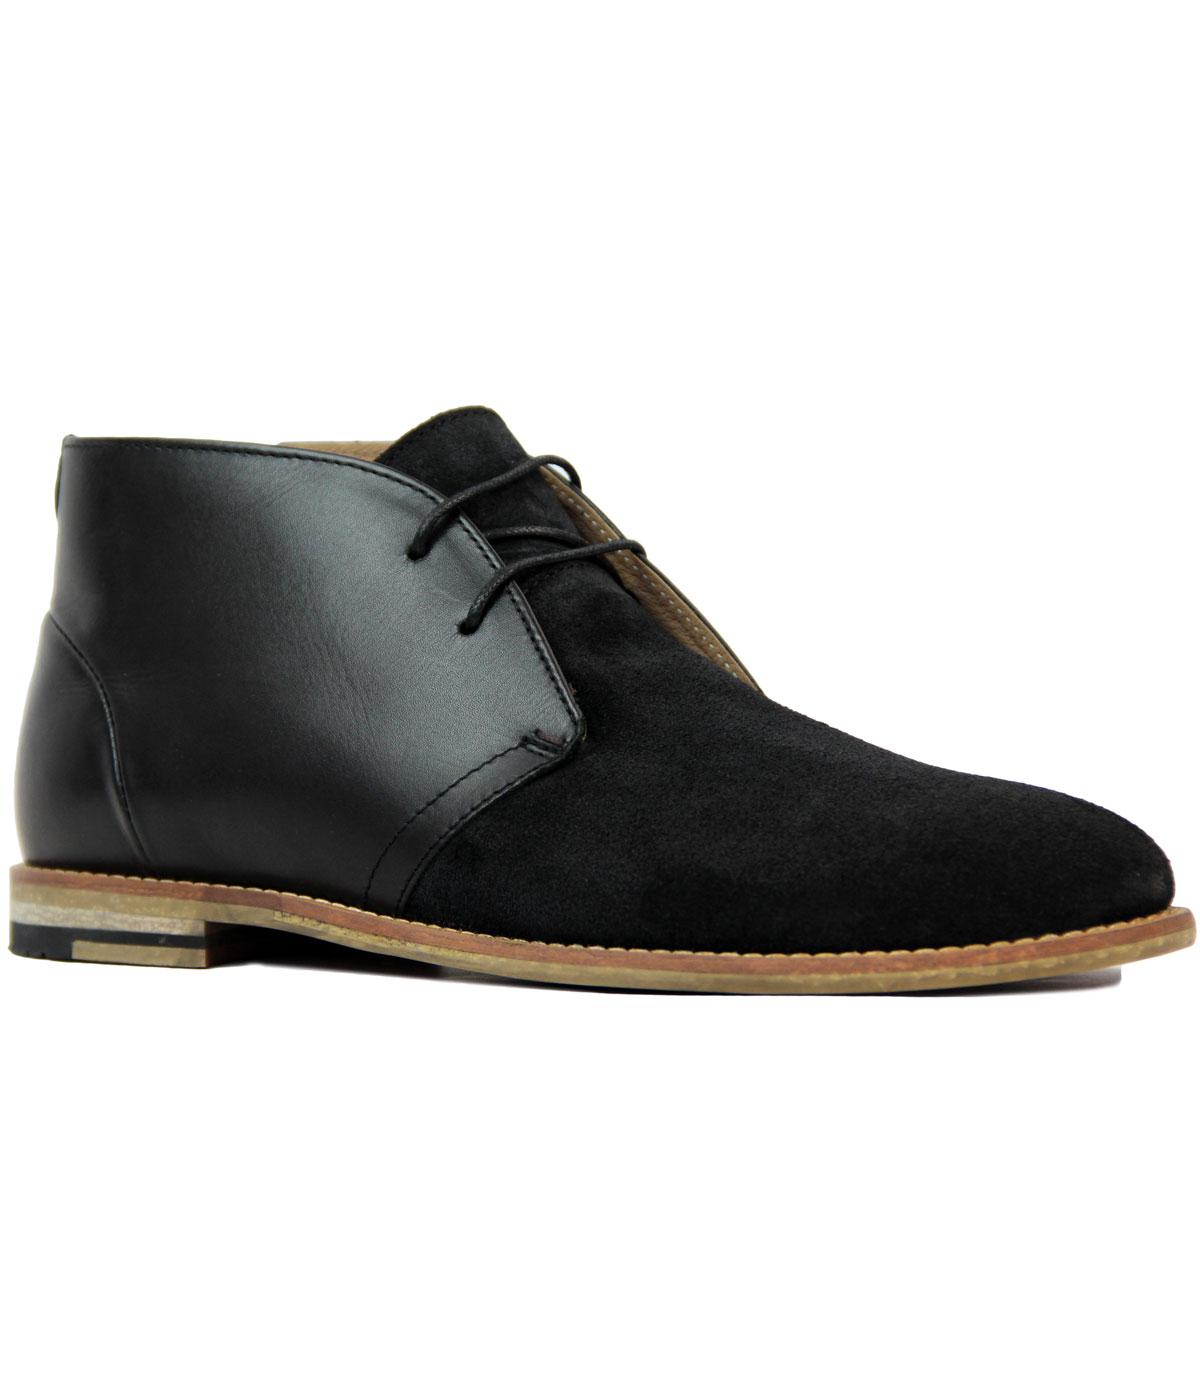 BEN SHERMAN Stom Retro Mod Suede and Leather Desert Boots Black